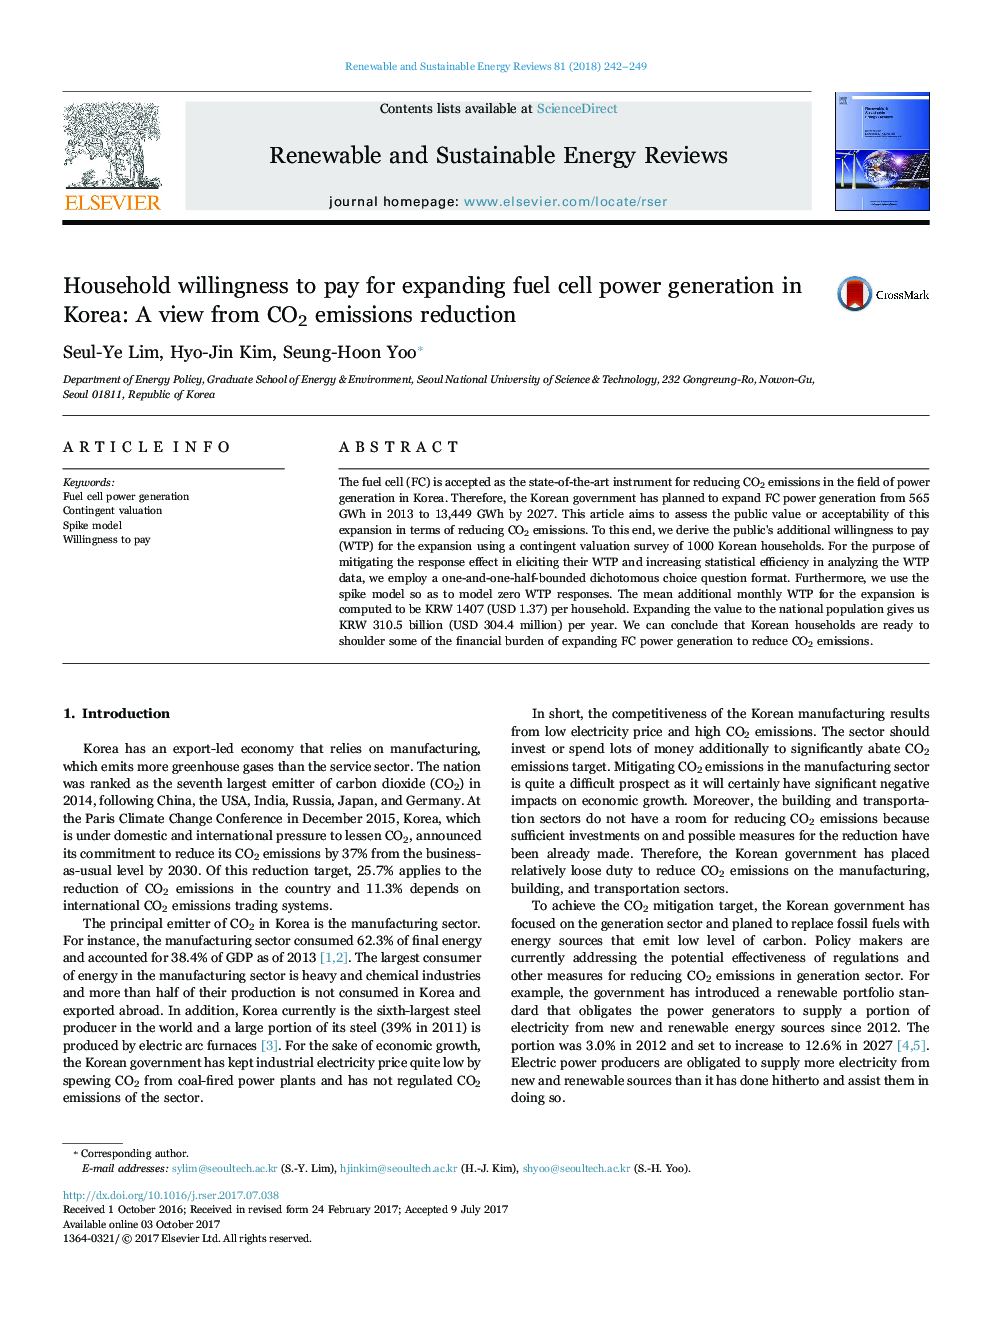 Household willingness to pay for expanding fuel cell power generation in Korea: A view from CO2 emissions reduction